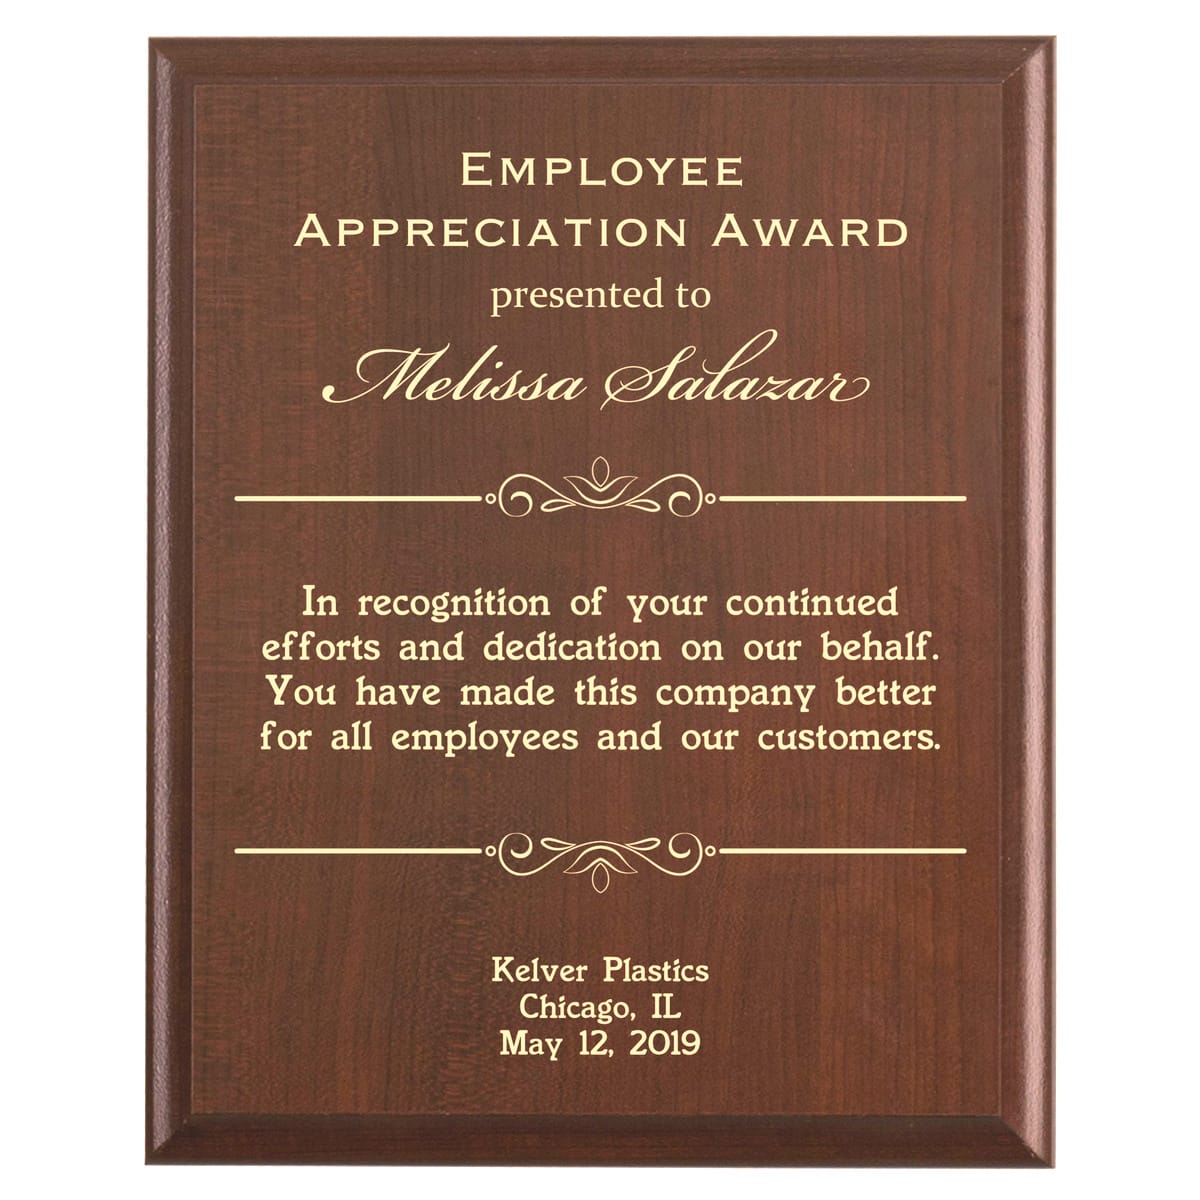 Plaque photo: Employee Appreciation Award design with free personalization. Wood style finish with customized text.